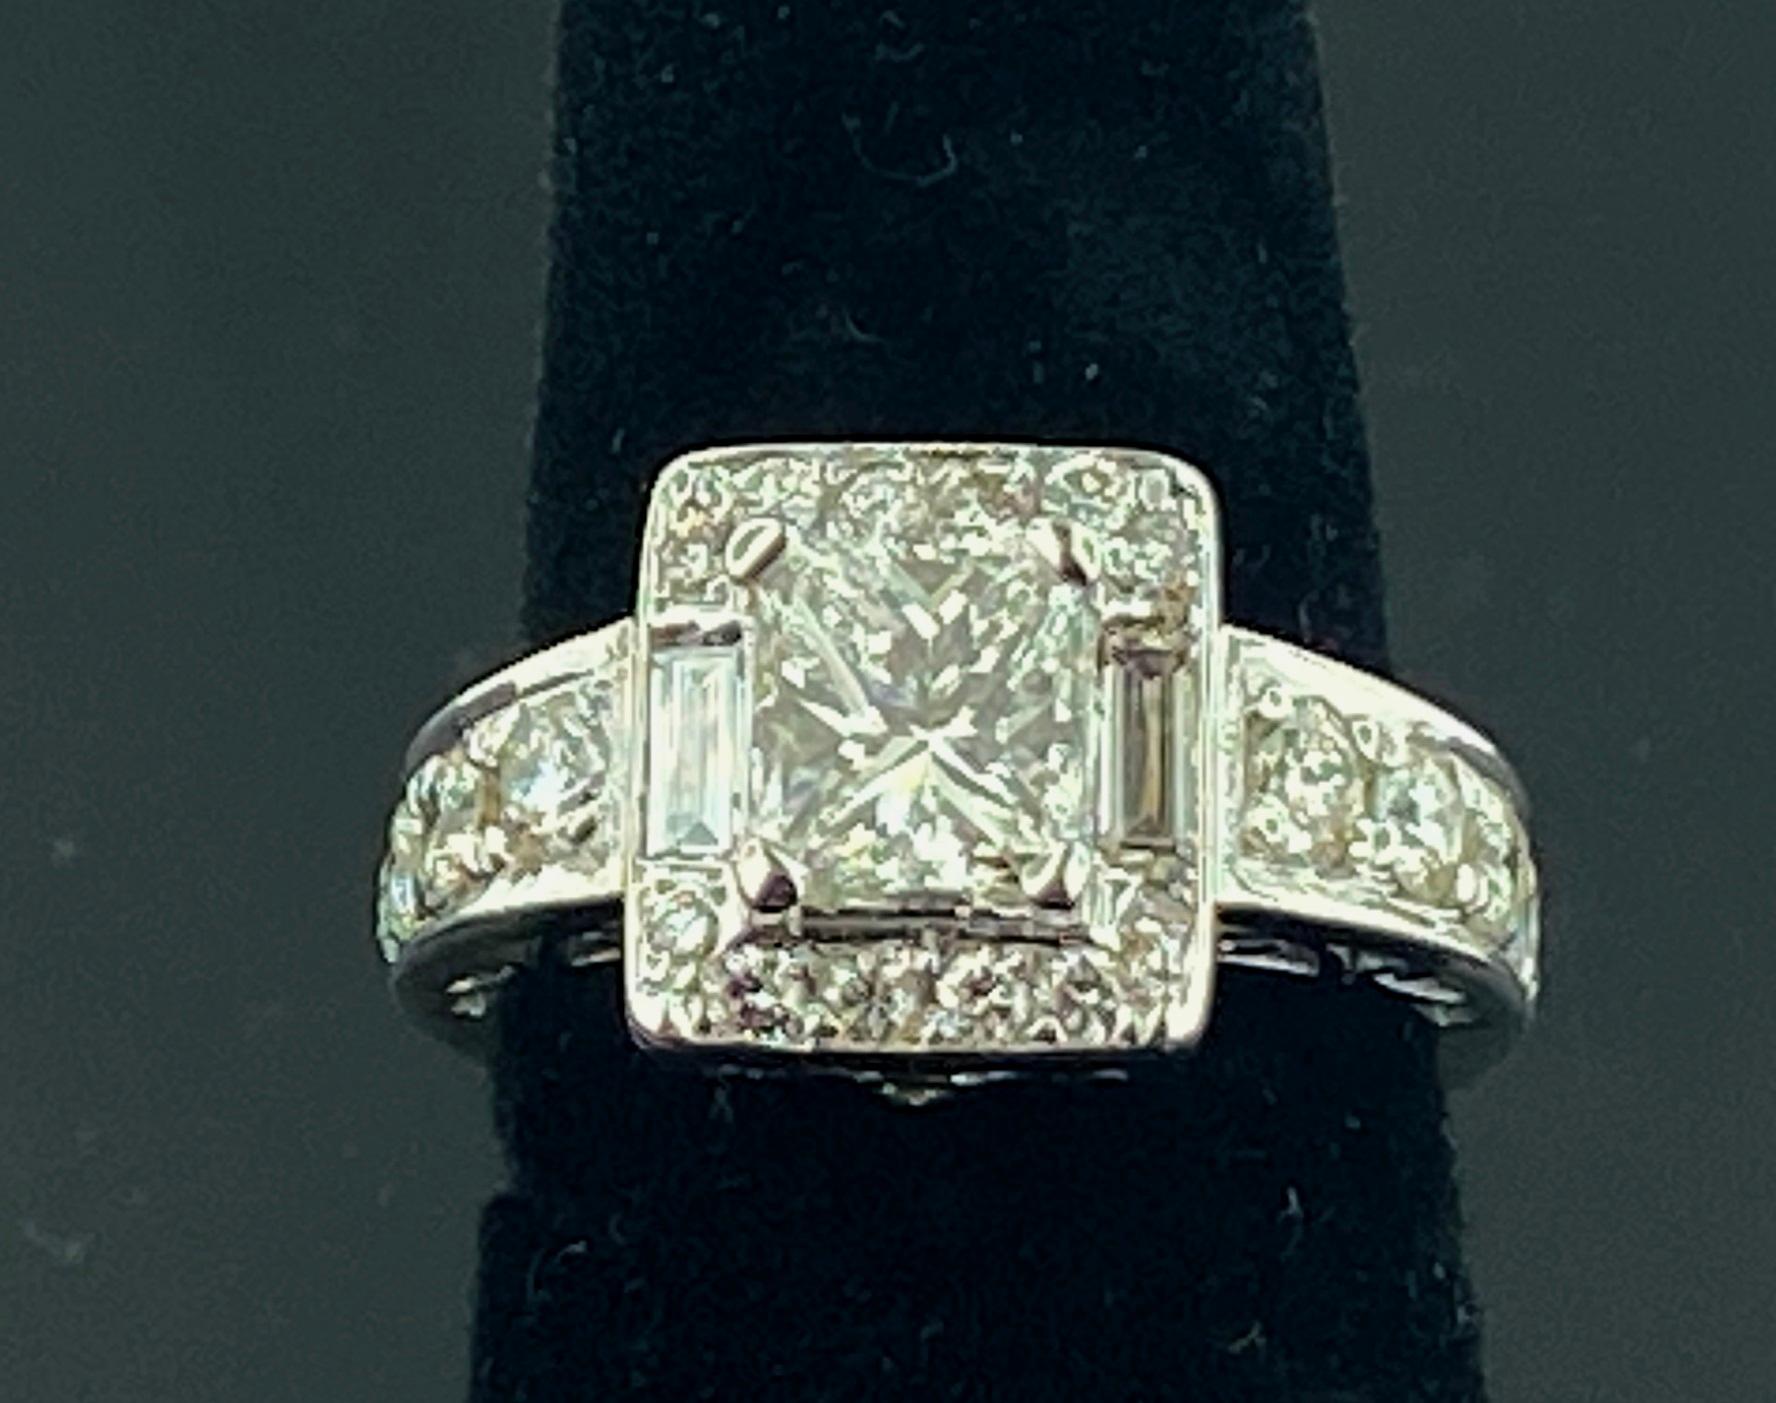 Set in 14 karat white gold, weighing 7.83 grams, is a 1.75 carat Princess Cut diamond in the center, Color Range: F-G, Clarity: VS-2, with 22 Round Brilliant Cut diamonds having a total weight of 1.25 carats and 2 Baguette Cut diamonds weighing 0.25